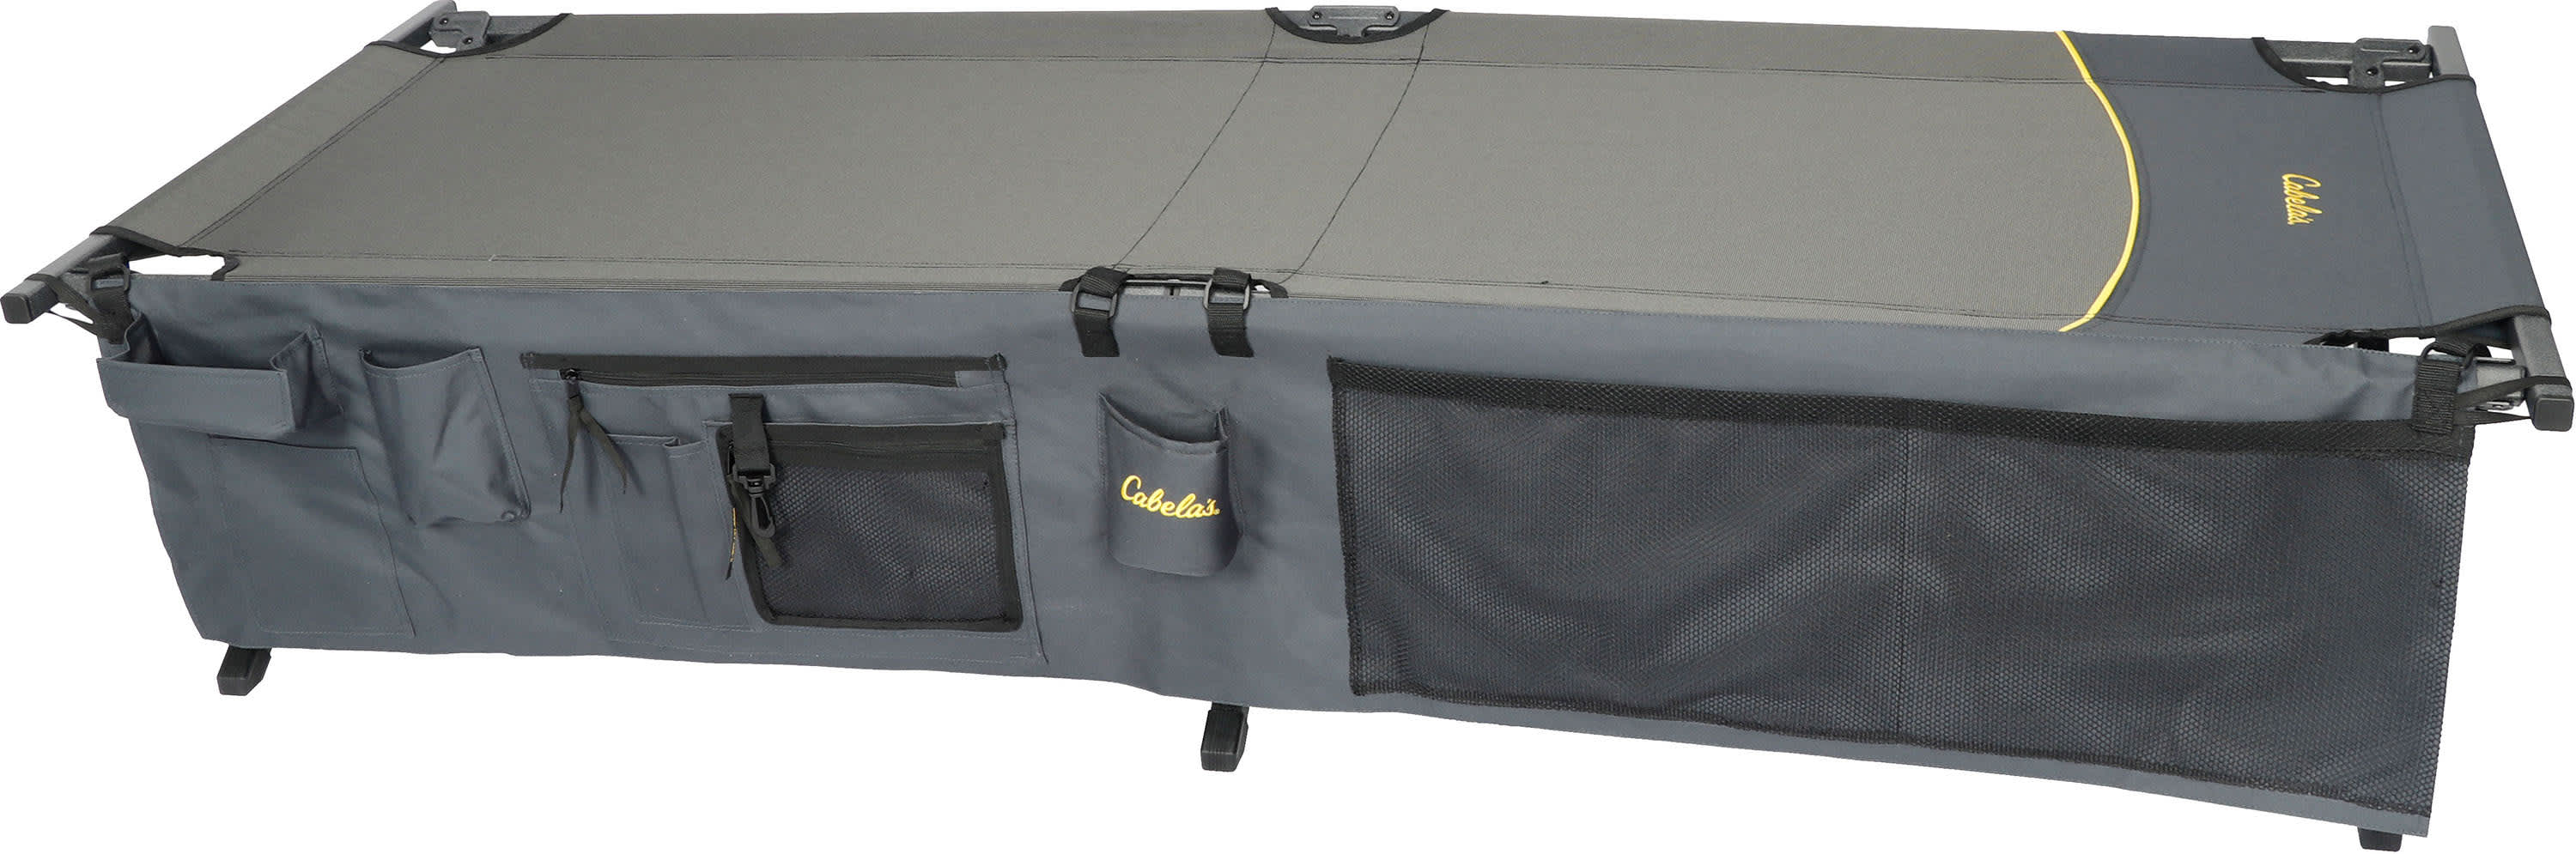 Cabela's® Cot with Organizer